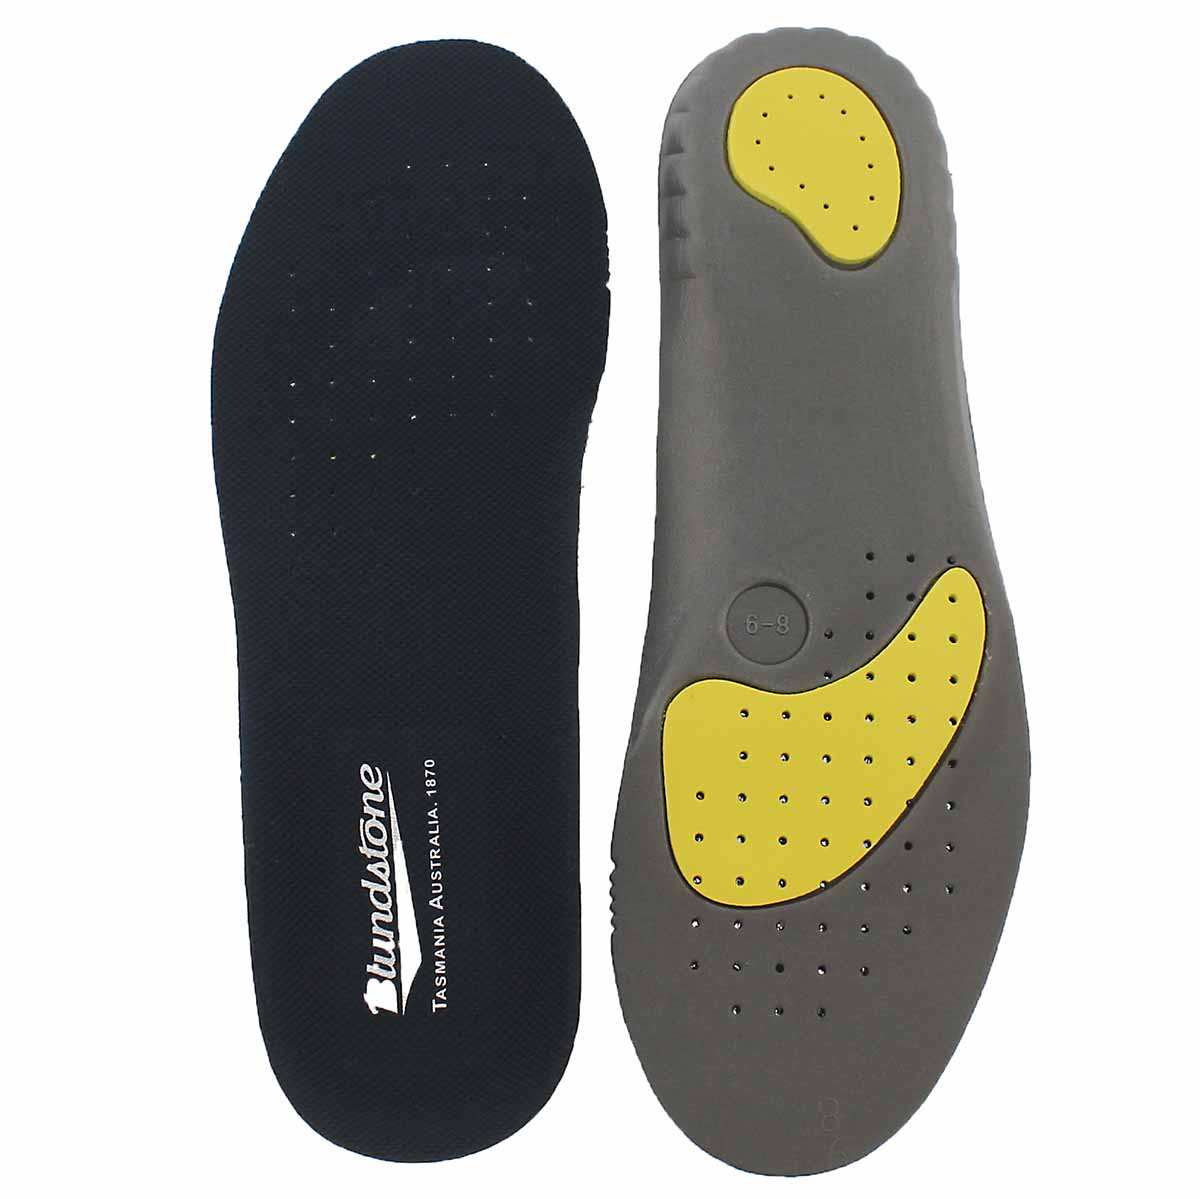 comfort insoles for shoes